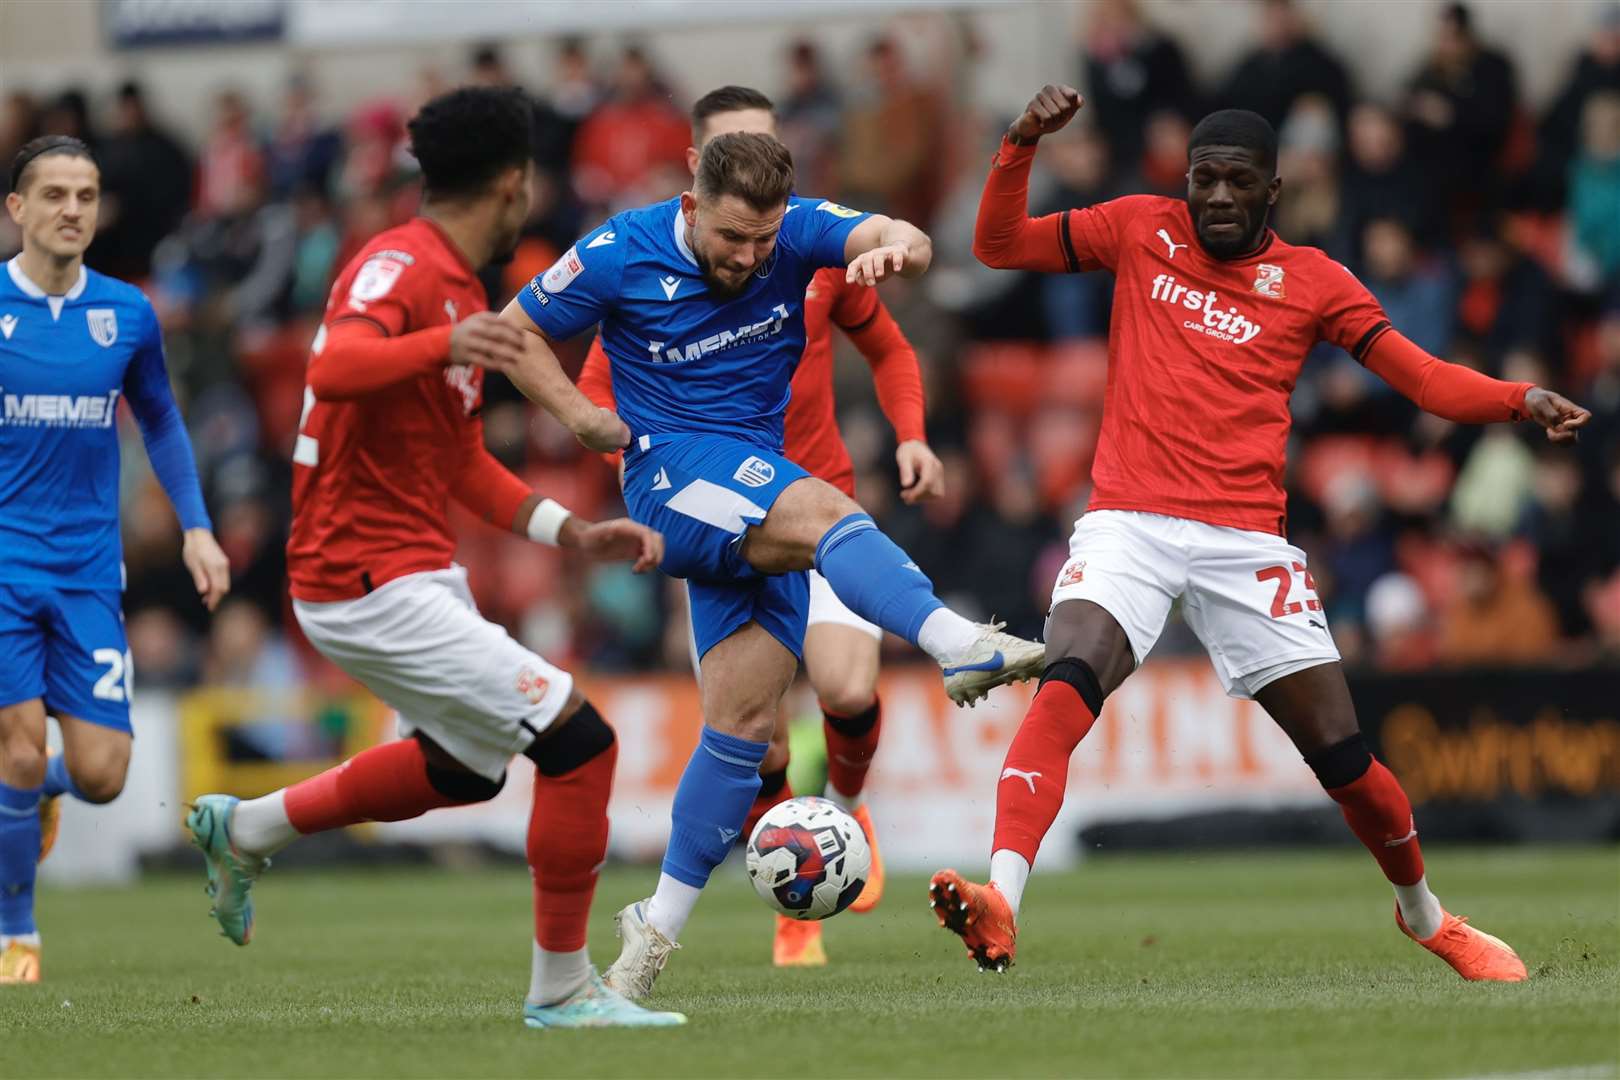 Alex MacDonald with a chance for the Gills at Swindon in the opening half